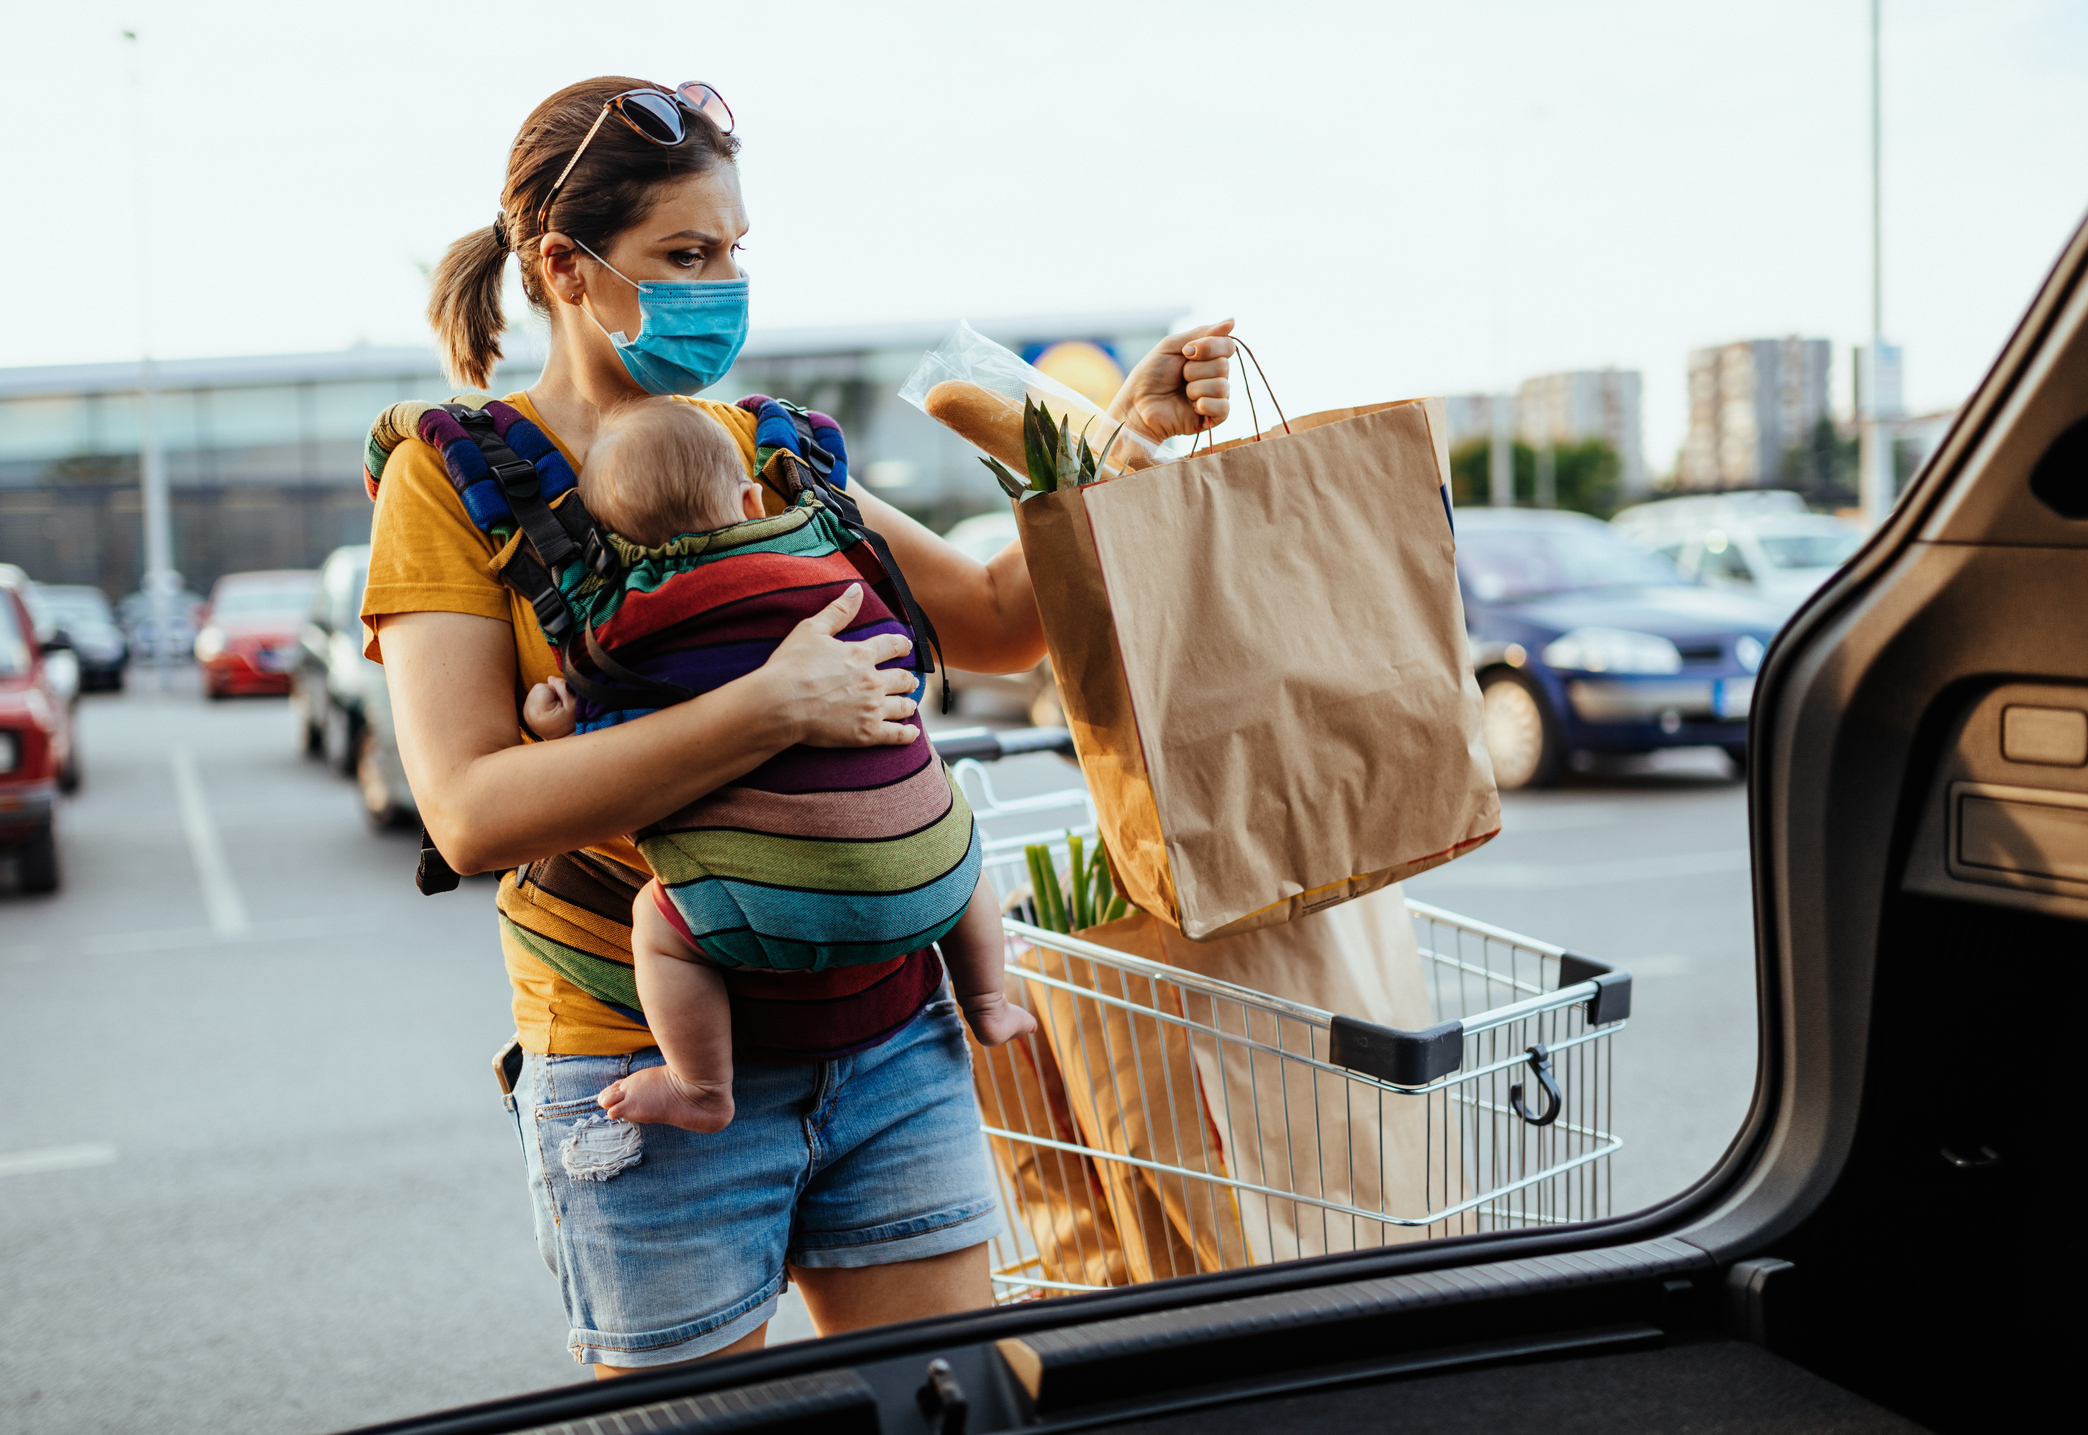 Woman wearing a mask unloading groceries, with a baby in a carrier on her chest